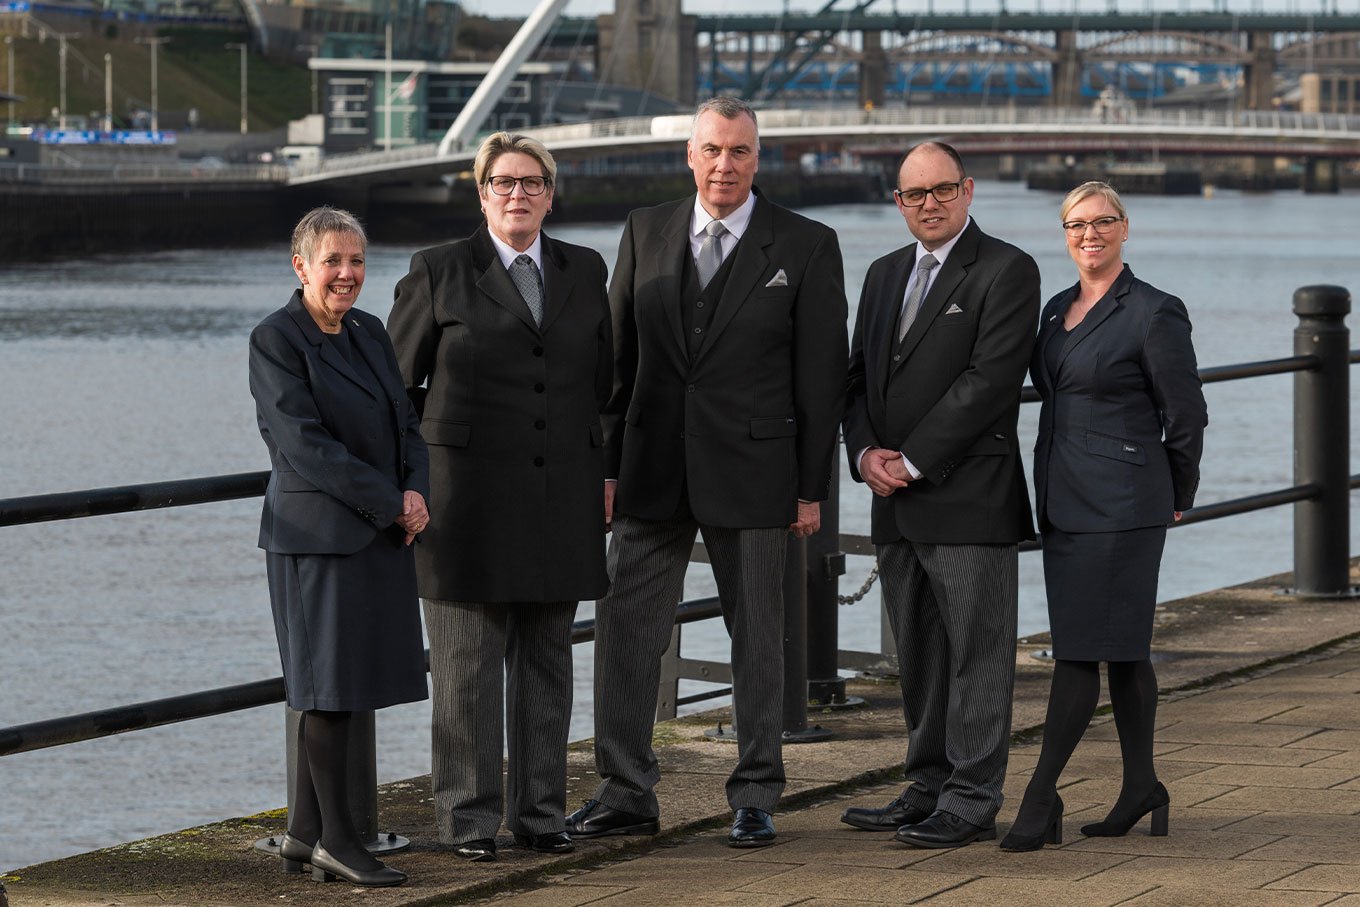 The team from WS Harrison funeral directors in Newcastle stand together on a bridge wearing smart uniforms